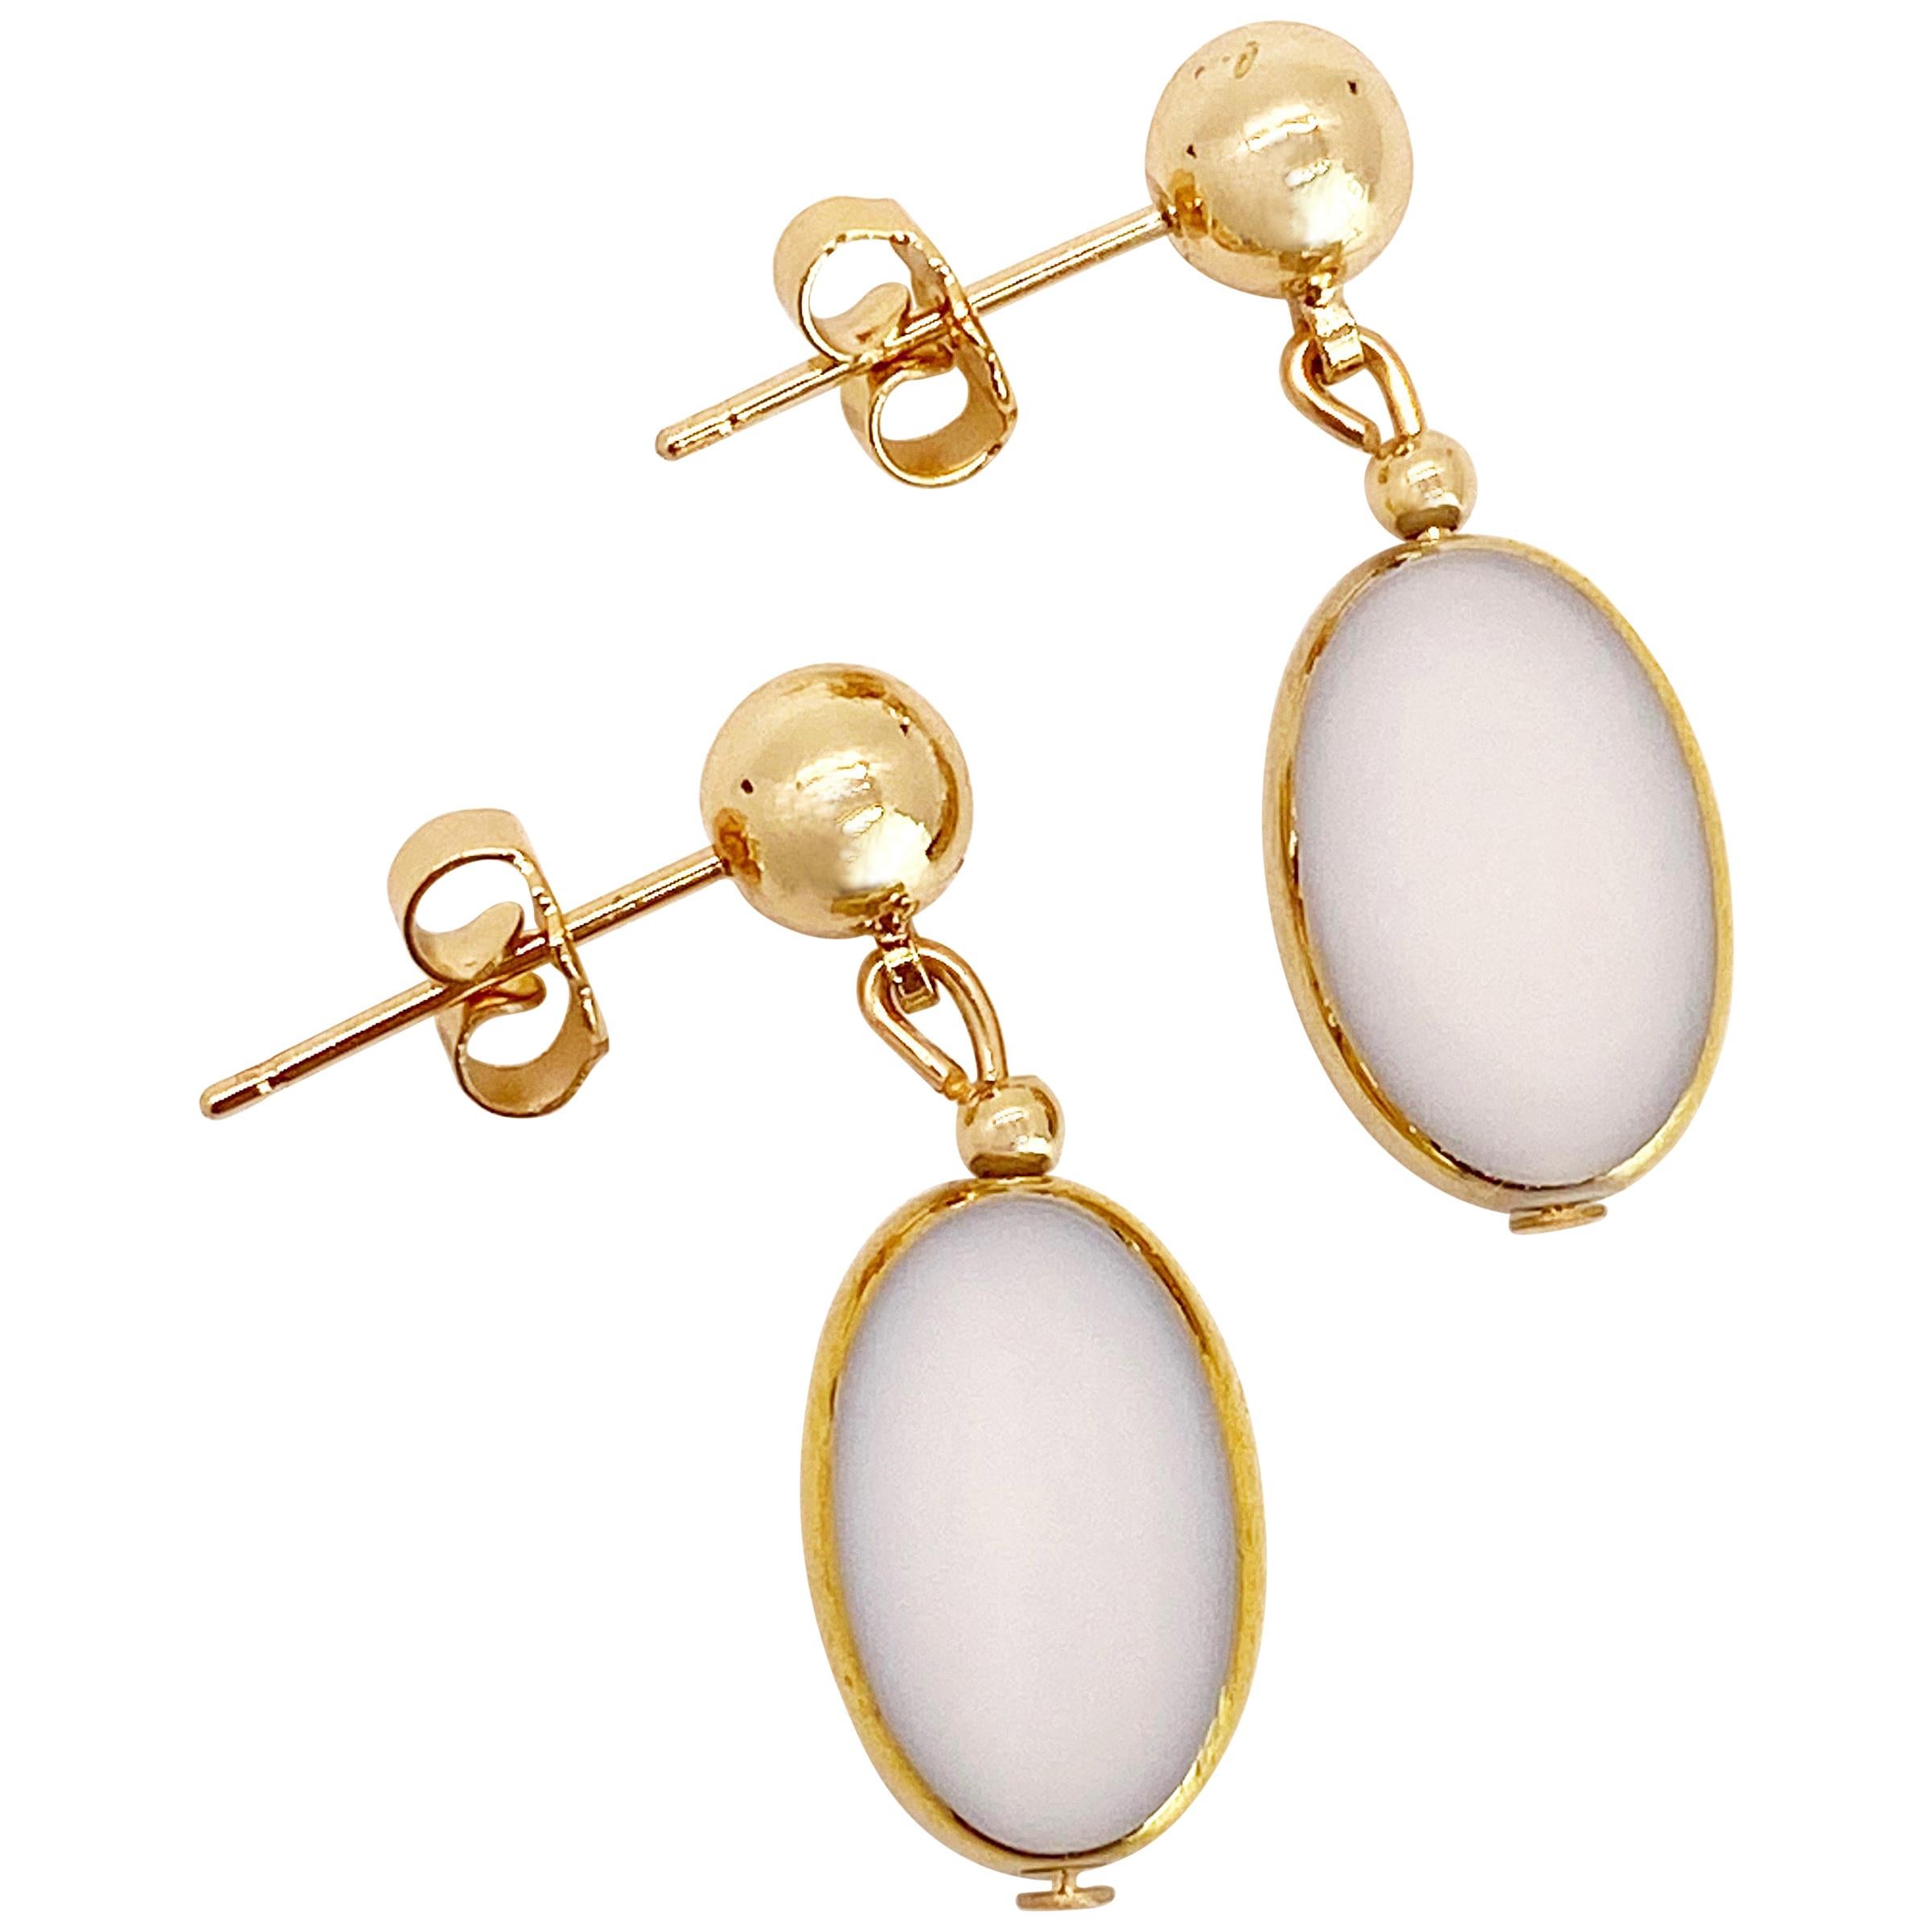 White Oval Vintage German Glass Beads edged with 24K gold Earrings For Sale